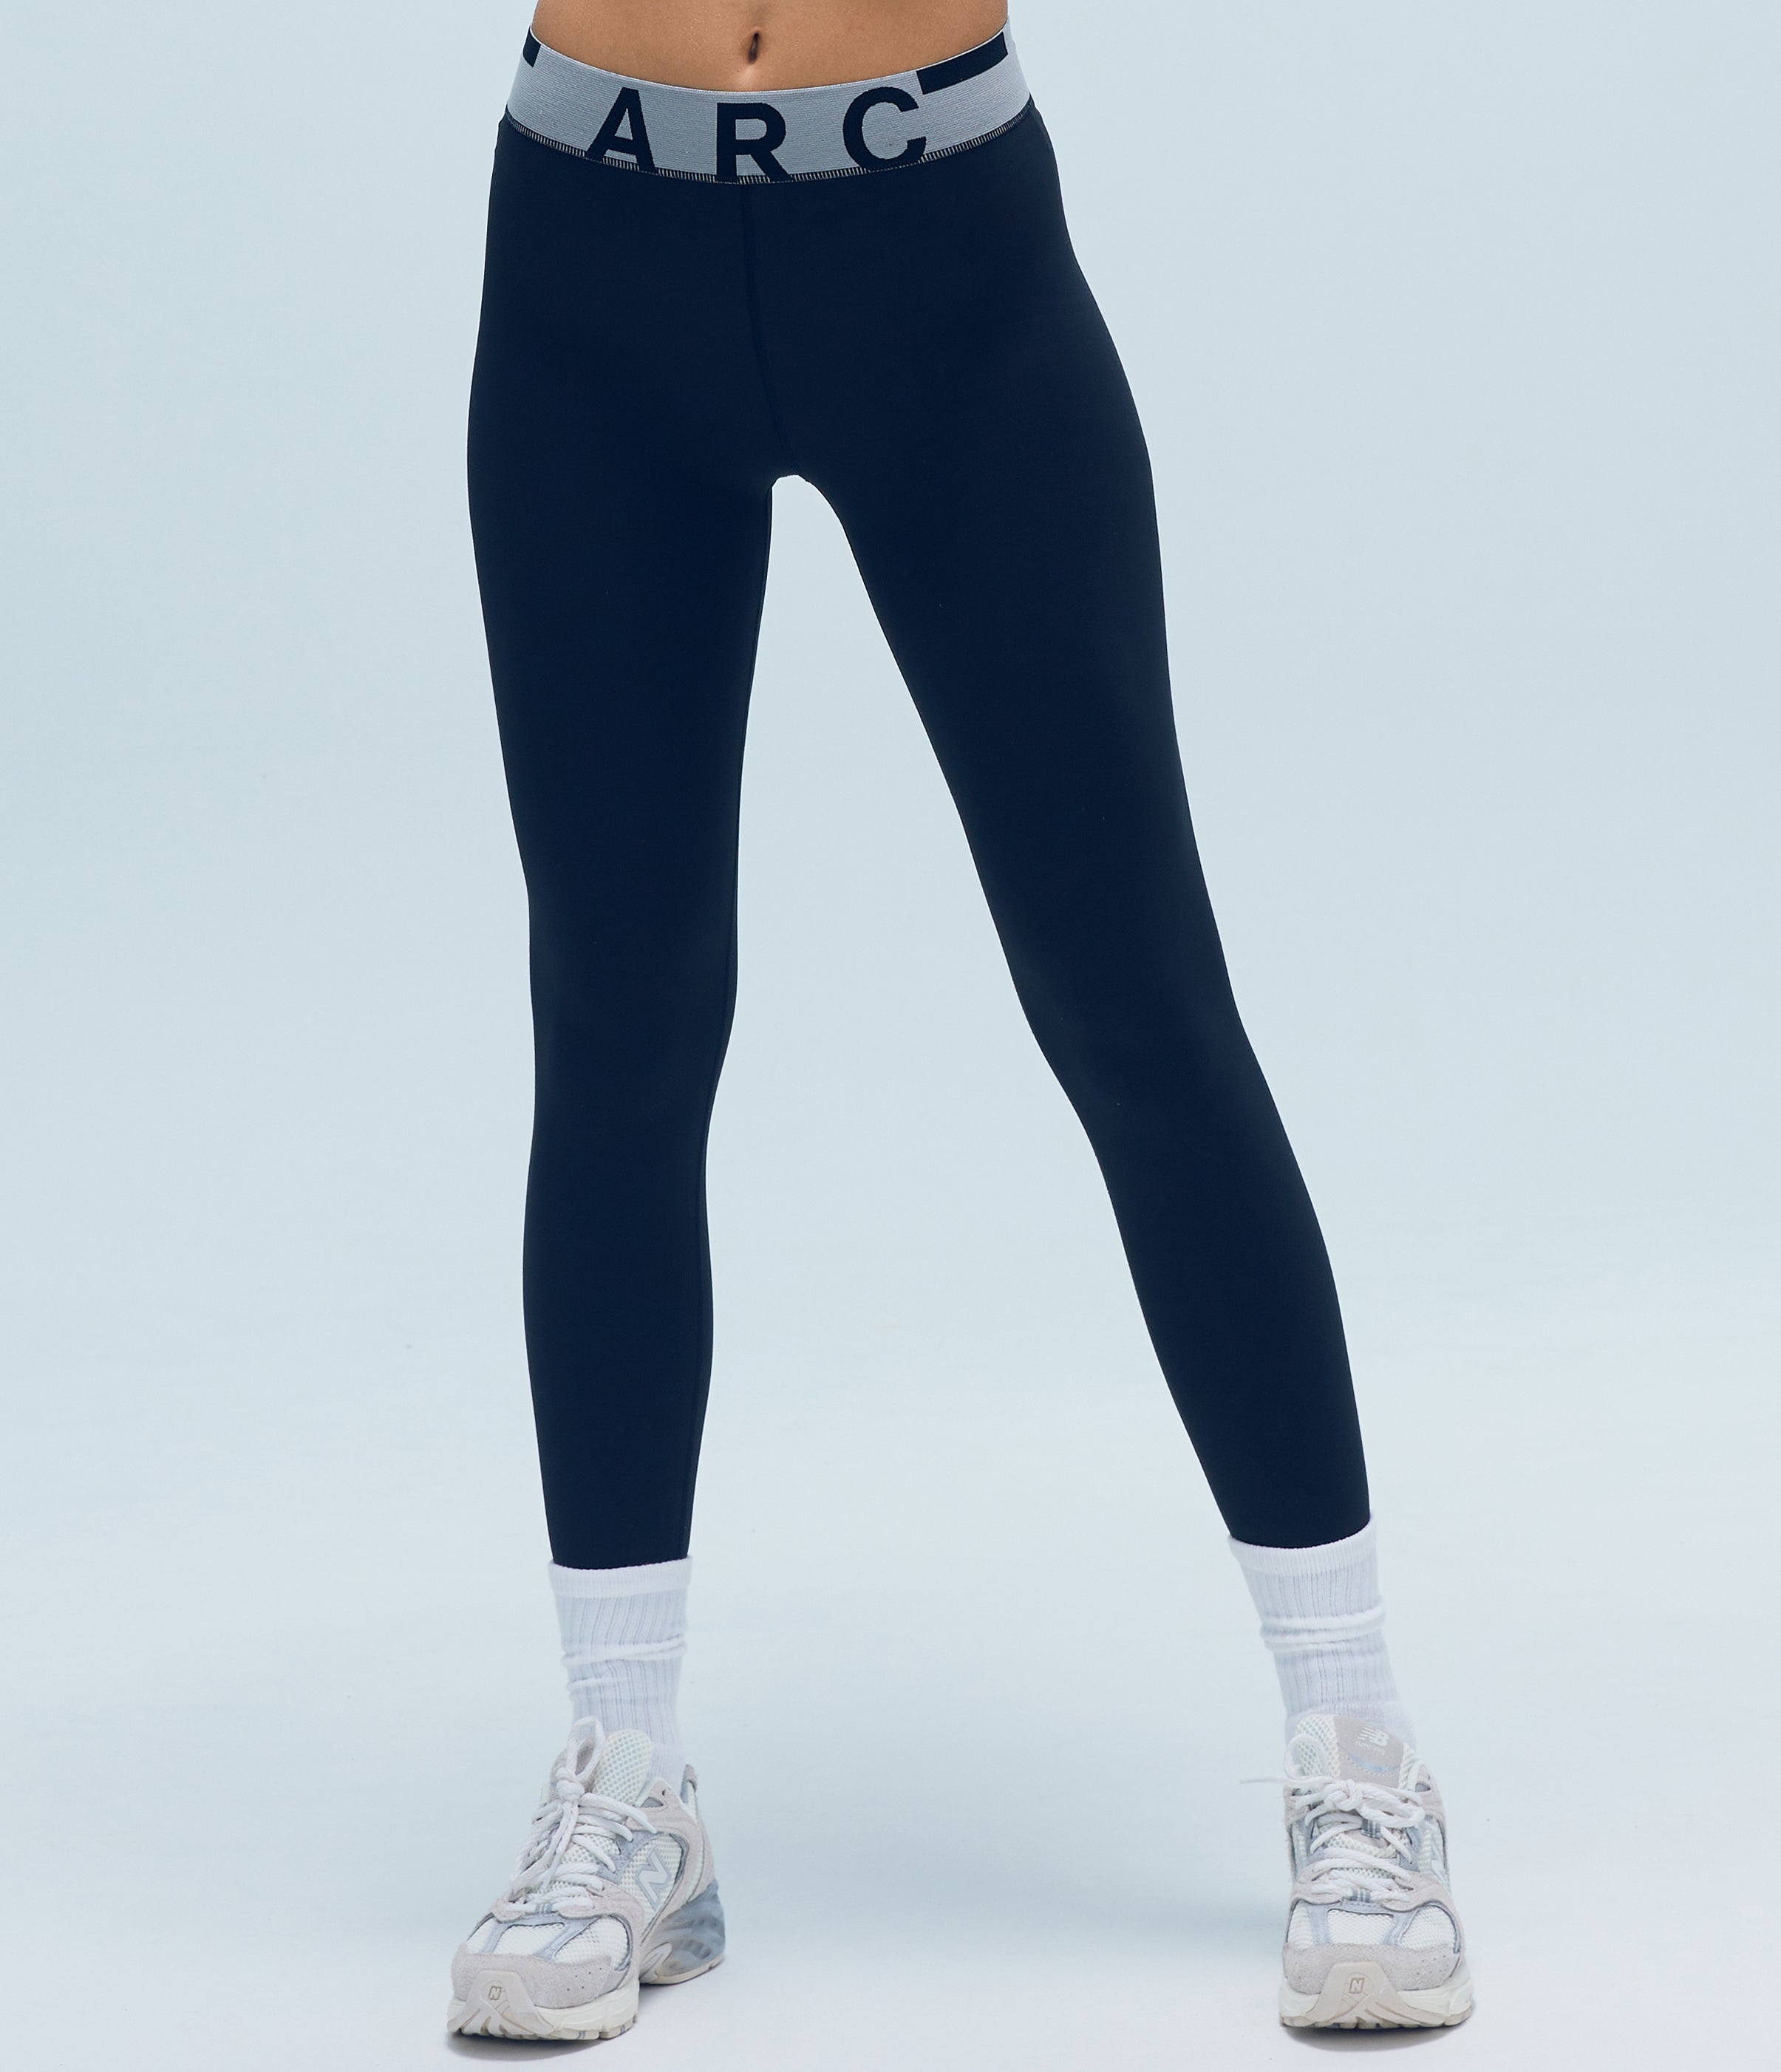 Navigate Your Active Lifestyle with ARC Active's Navi Leggings